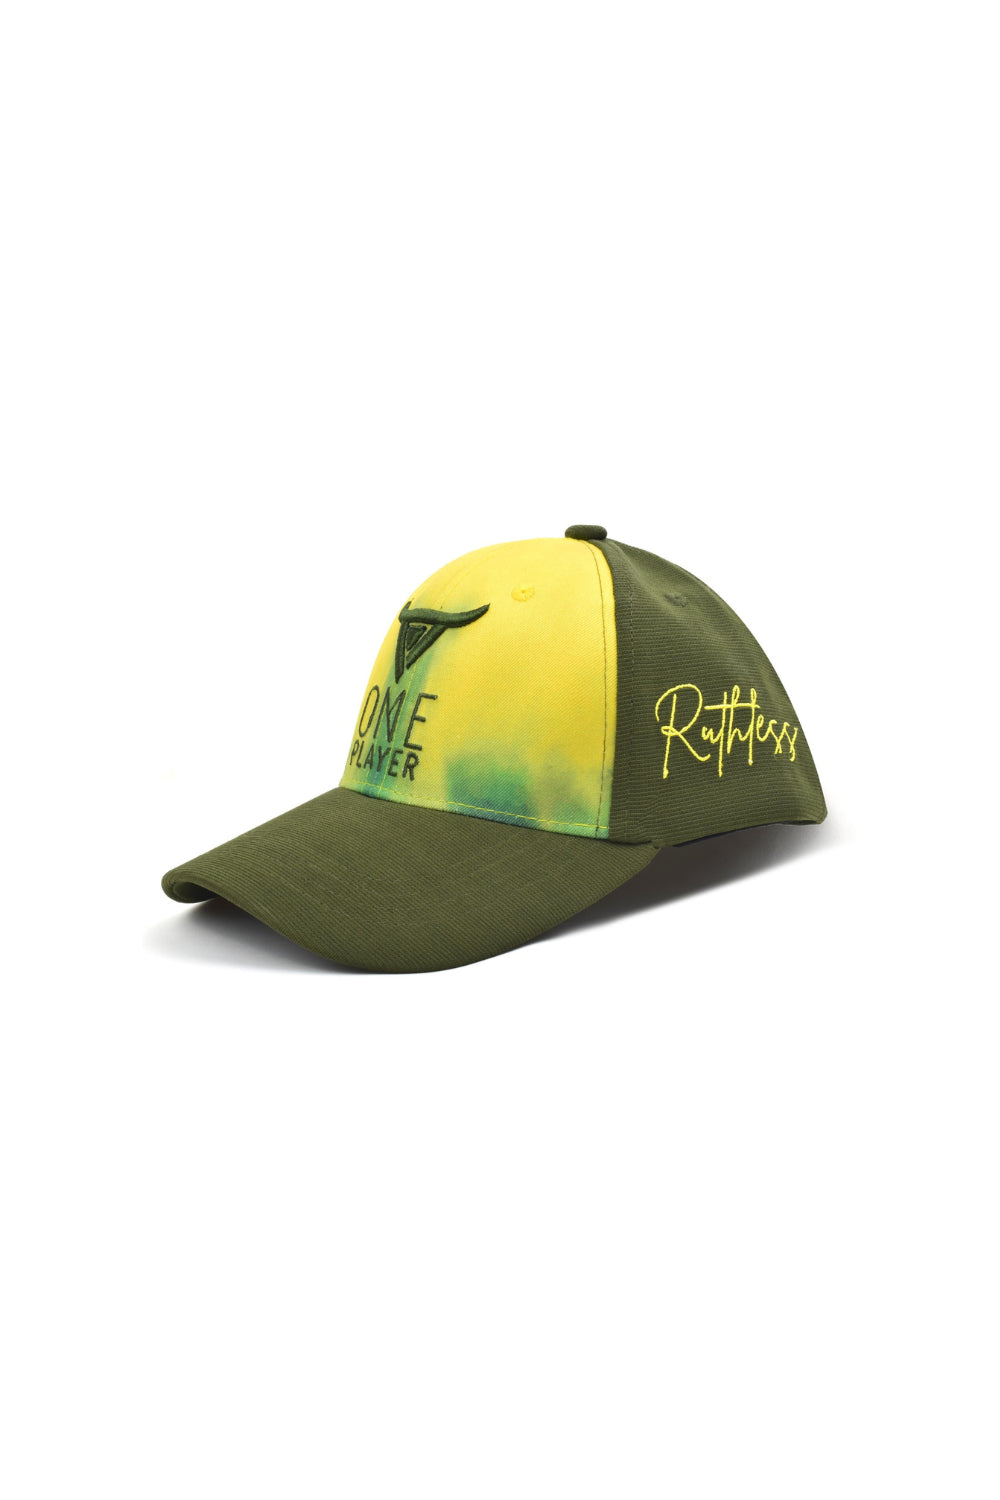 Unisex Green & Yellow Solid Baseball cap, has a visor by One Player